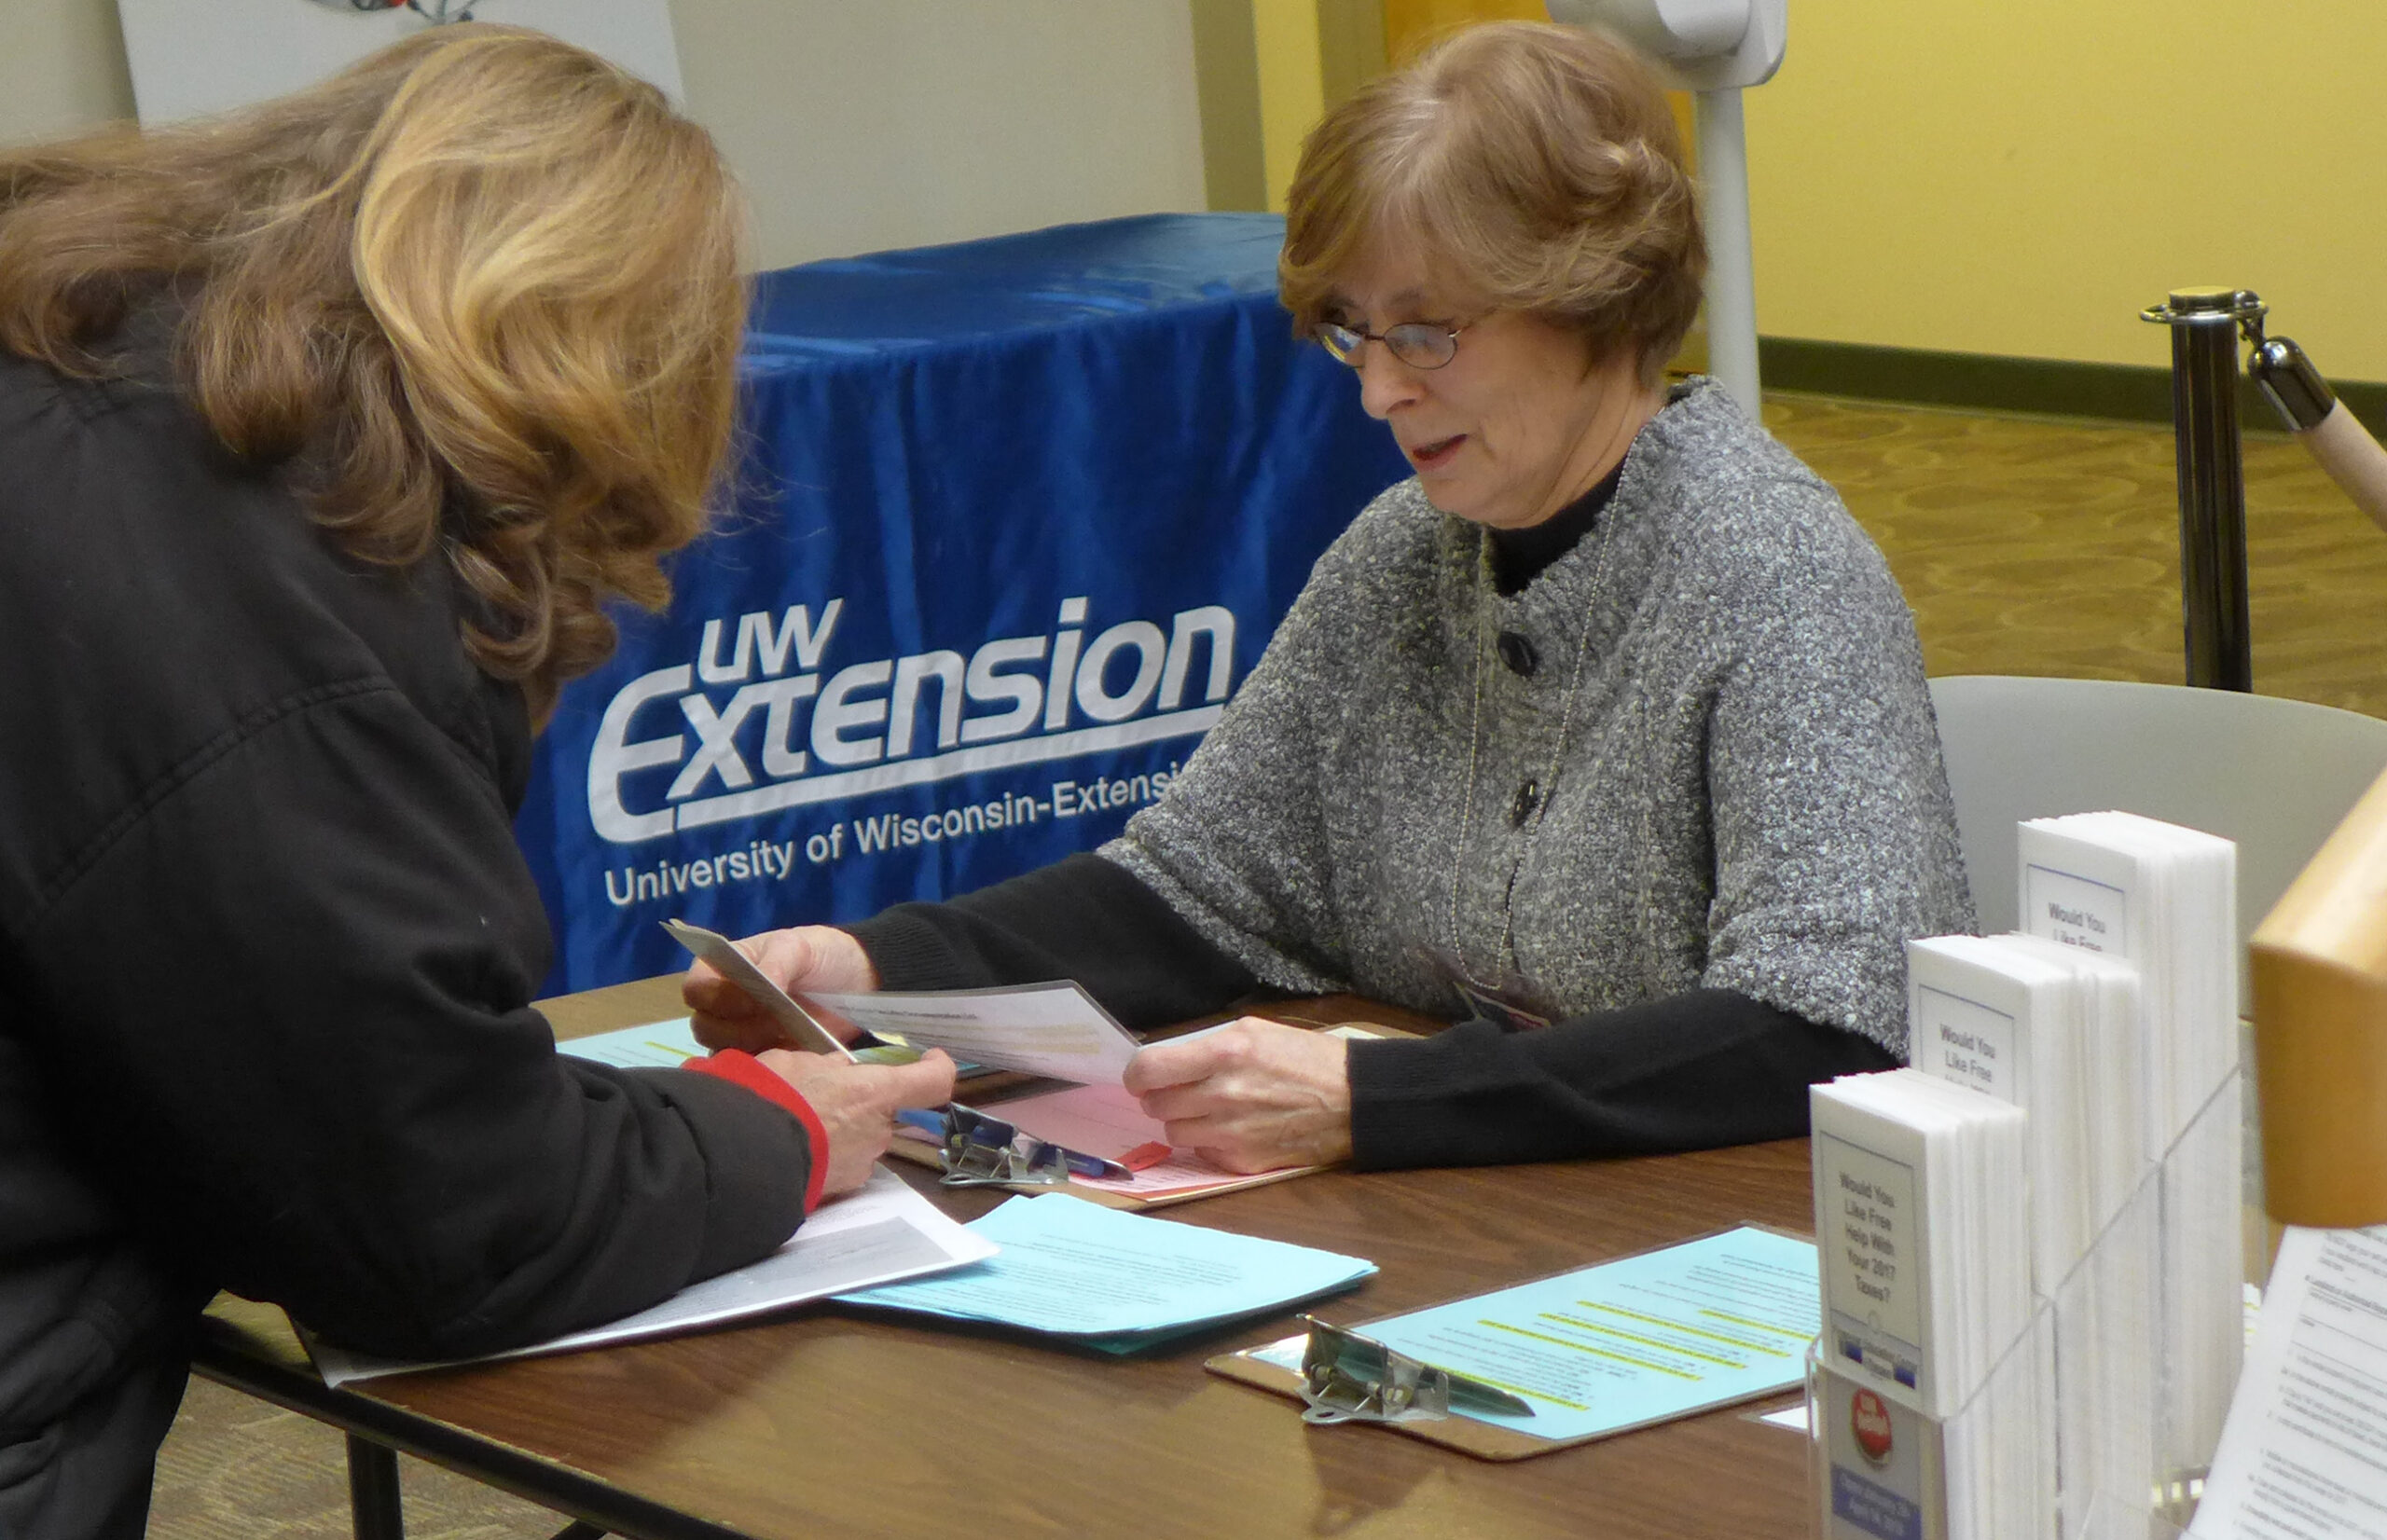 Free Tax Centers Offering Help To Low-Income Tax Filers